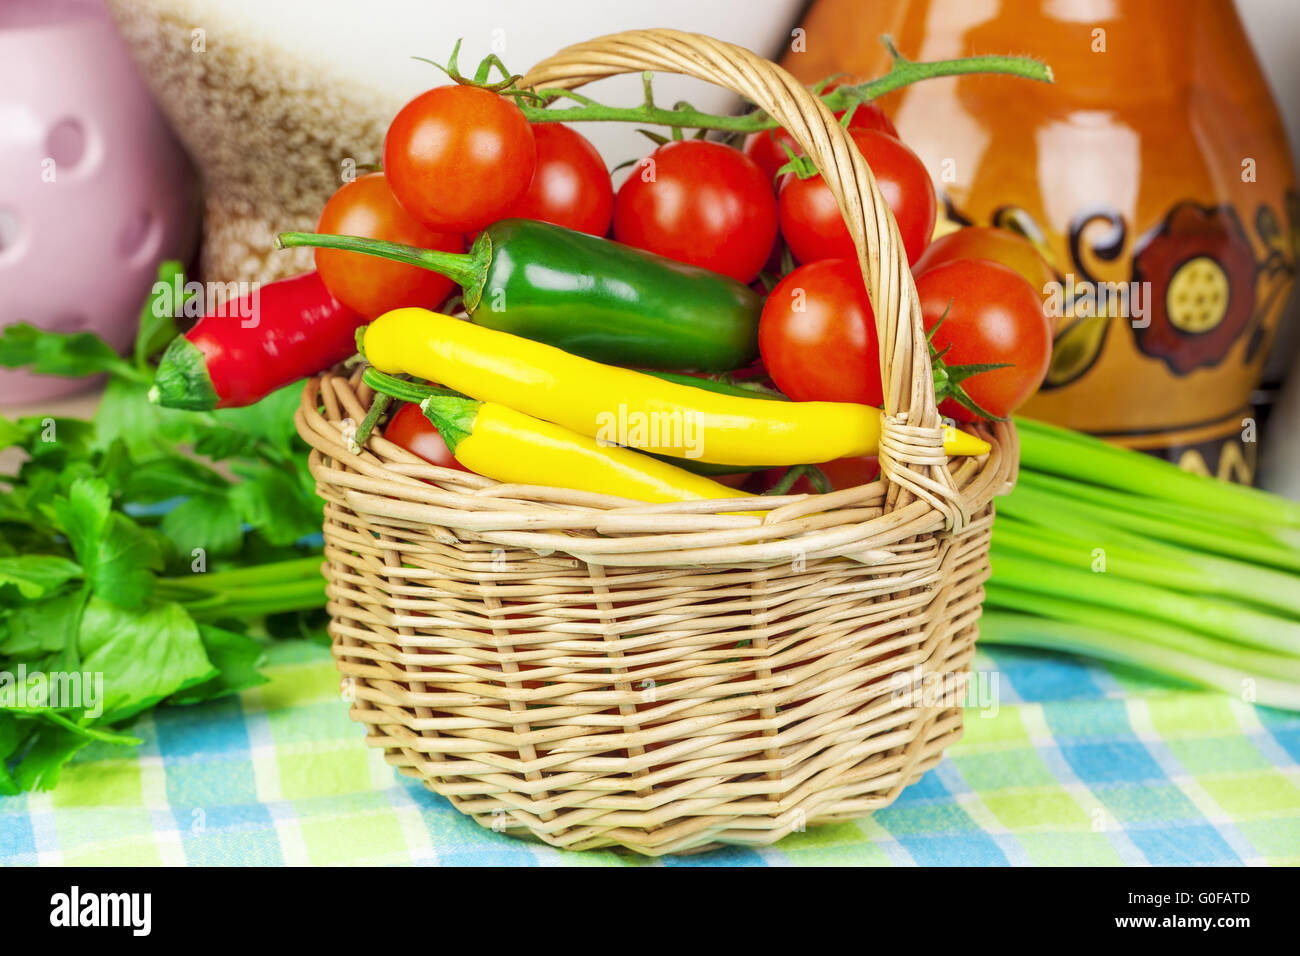 Peppers, tomatoes with spring onions and parsley i Stock Photo